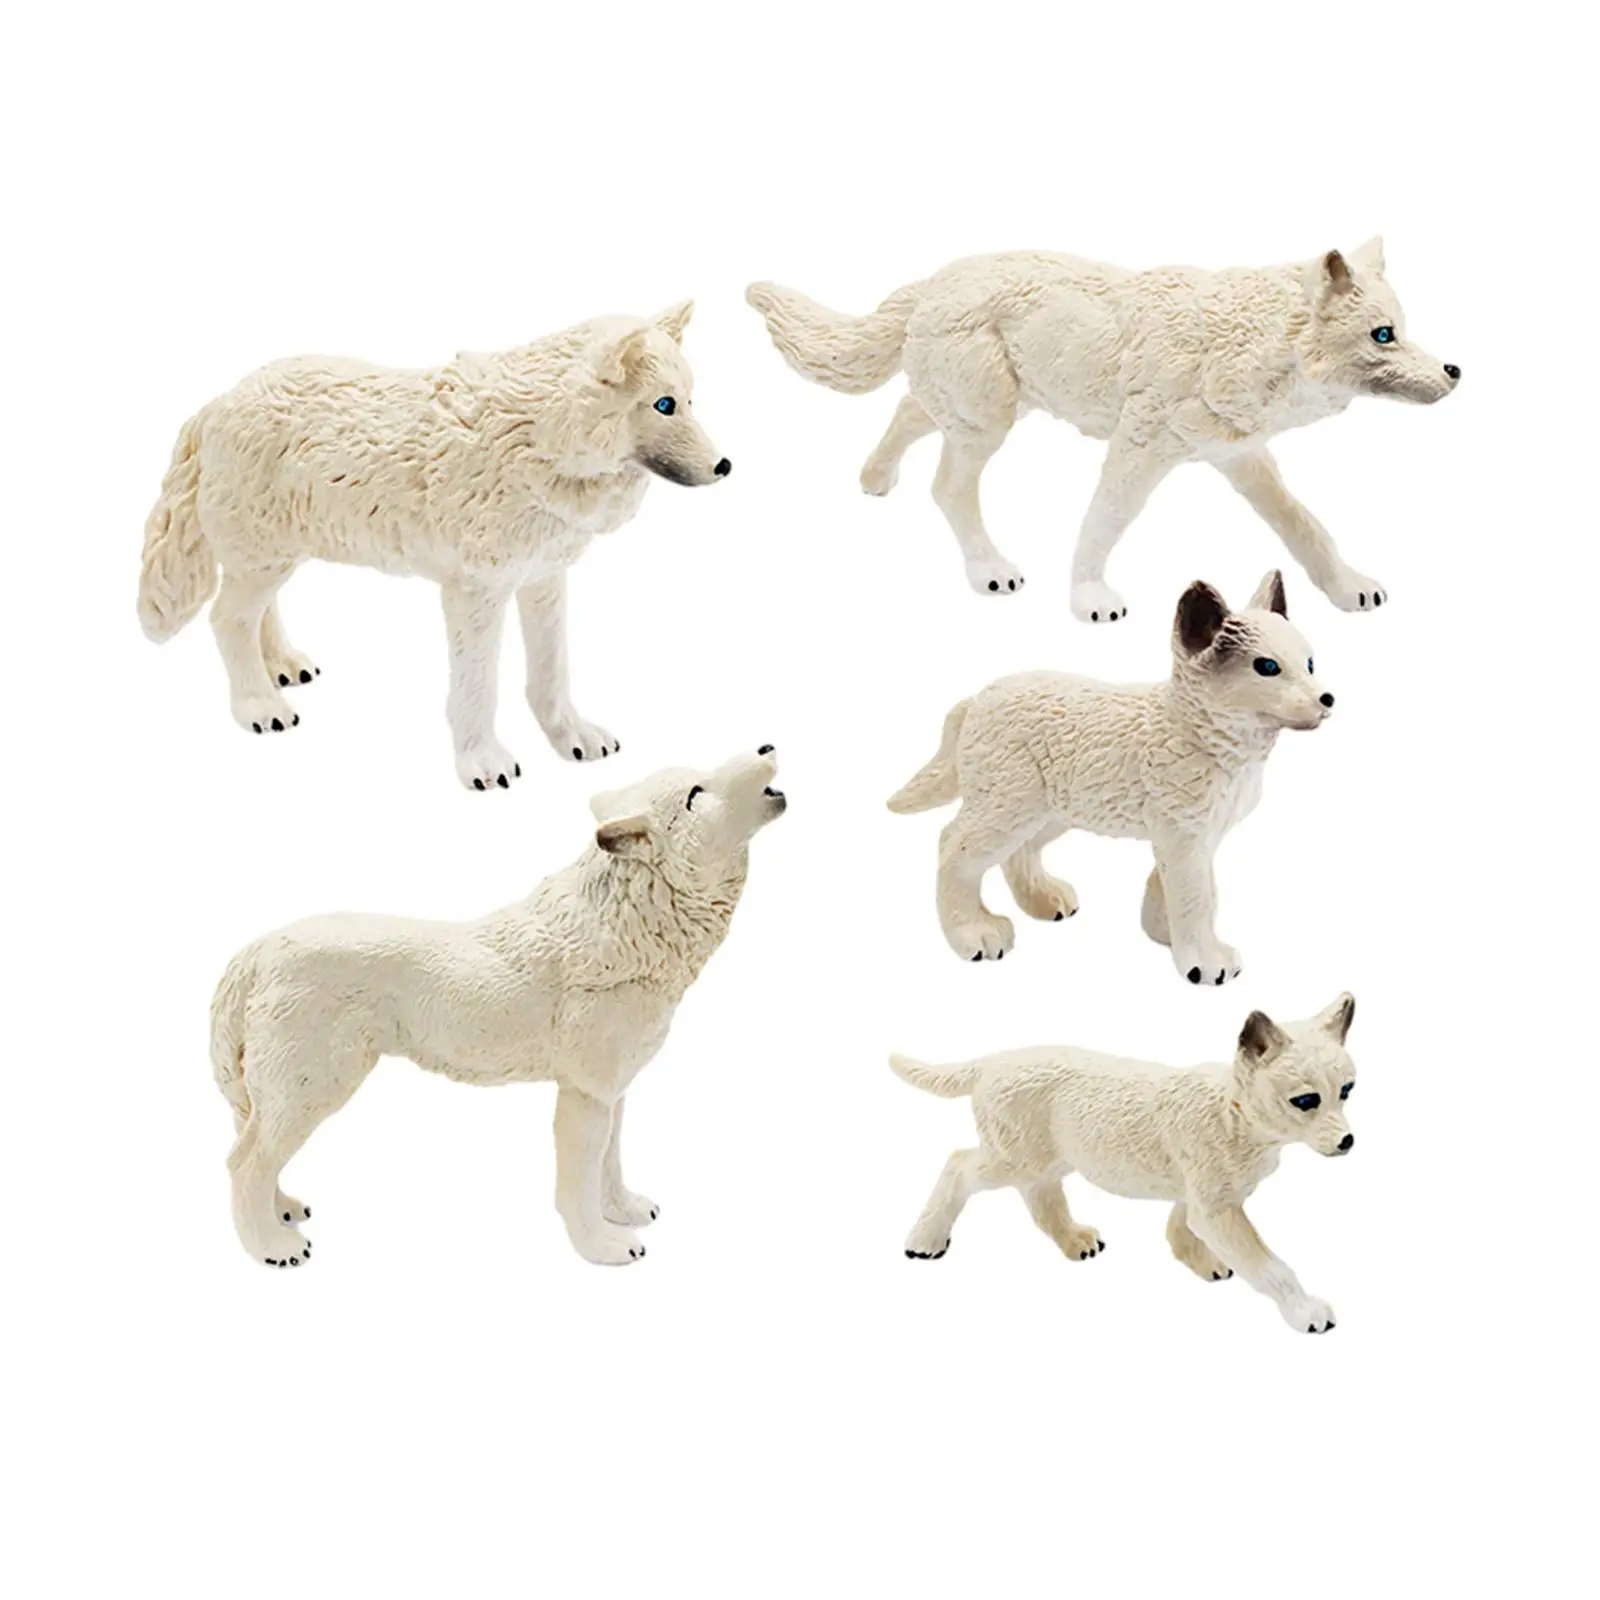 5Pcs Wolf Figurines White Wolf Playset Model Preschool Simulation Wildlife Animal Statue for Birthday Gifts Cake Topper